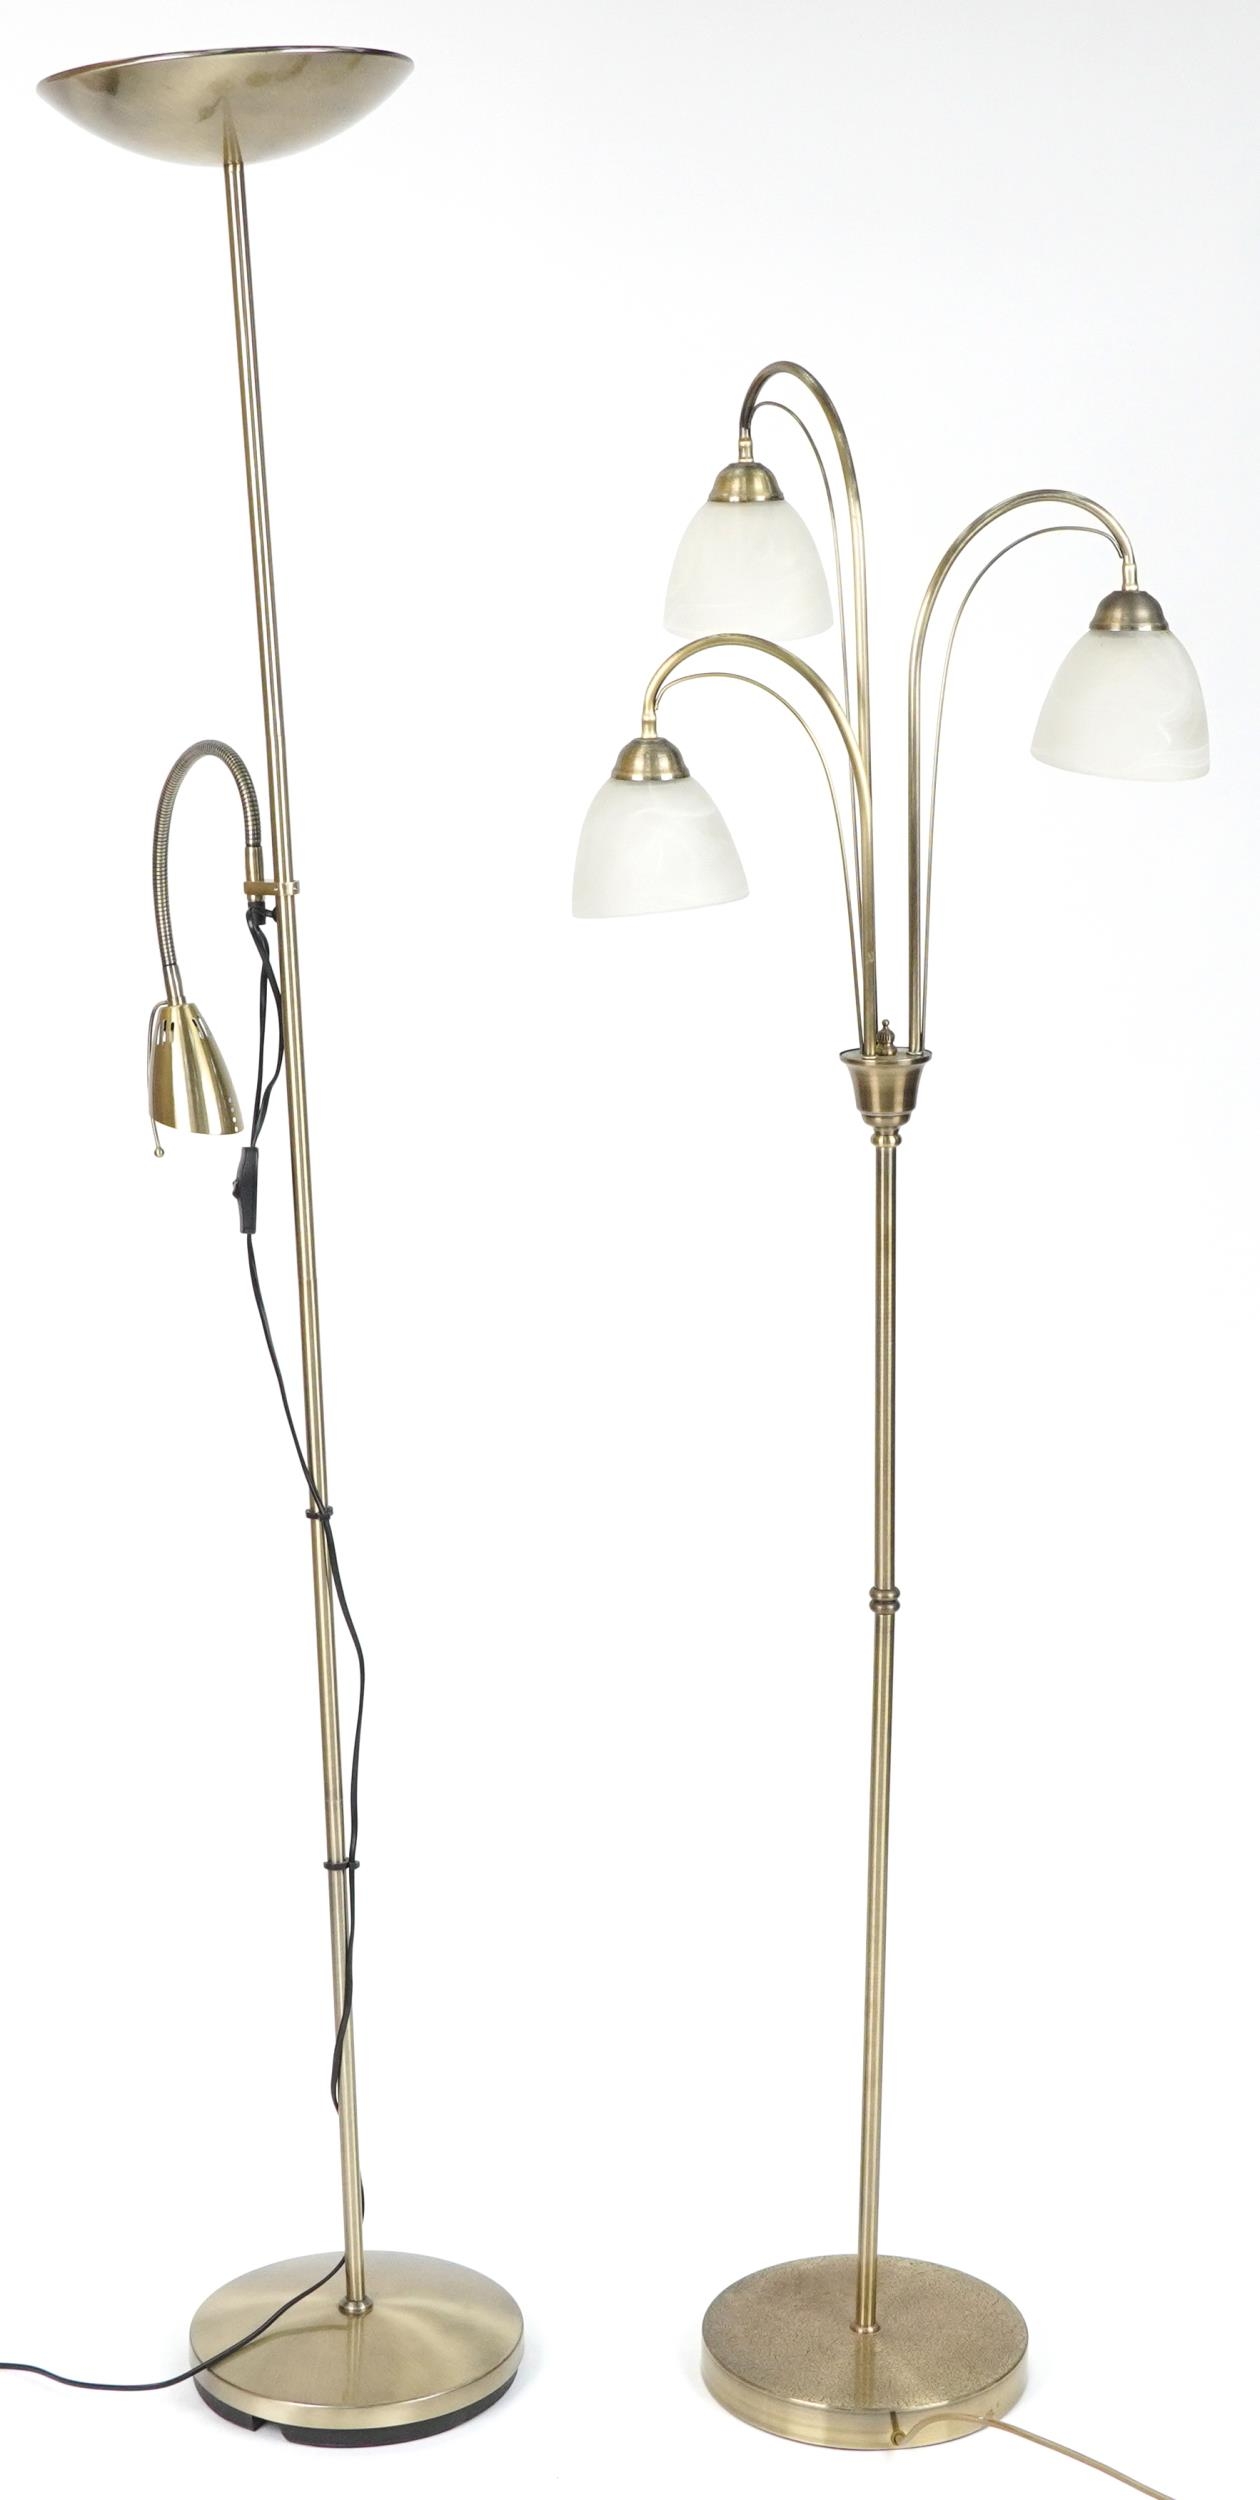 Two brass standard lamps including a three branch example with frosted glass shades, 179.5cm high - Image 2 of 2